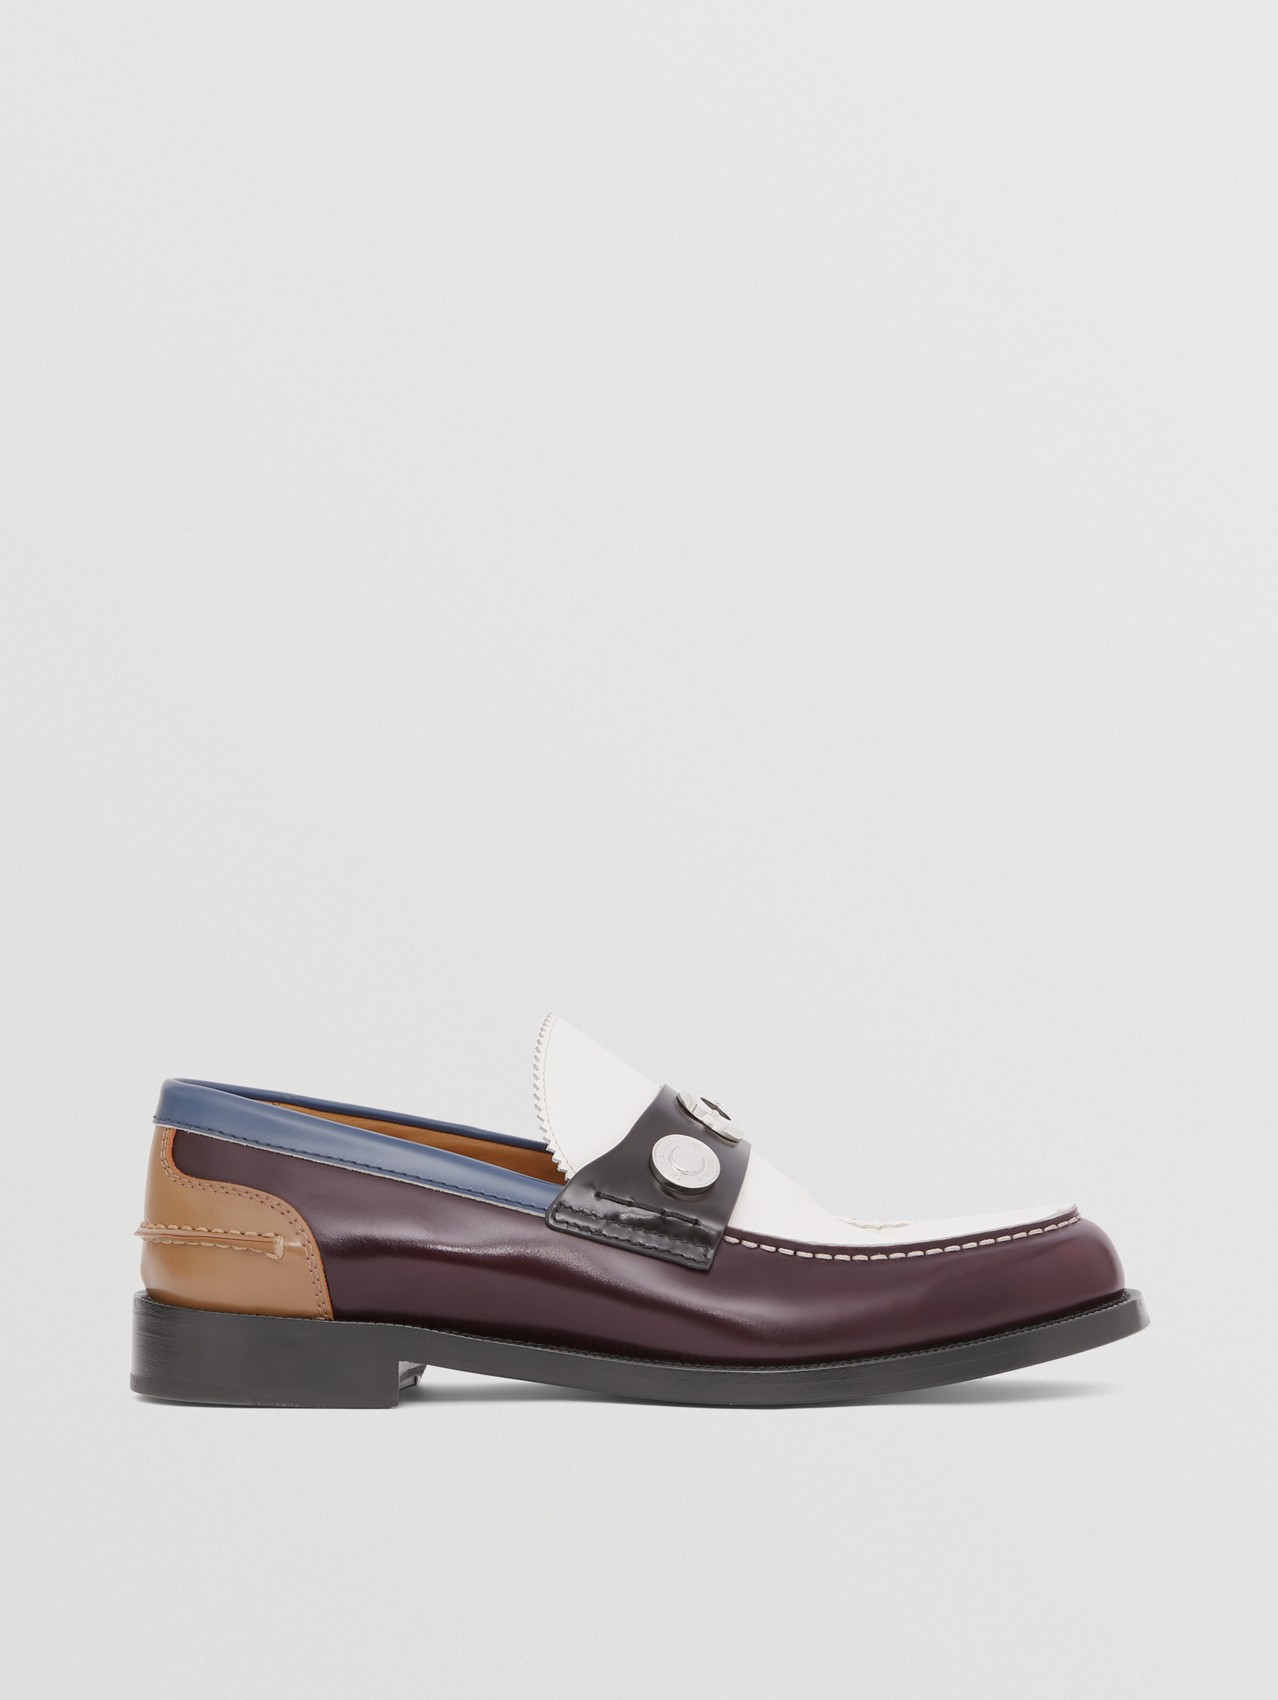 Logo Detail Colour Block Leather Loafers in Deep Maroon/black